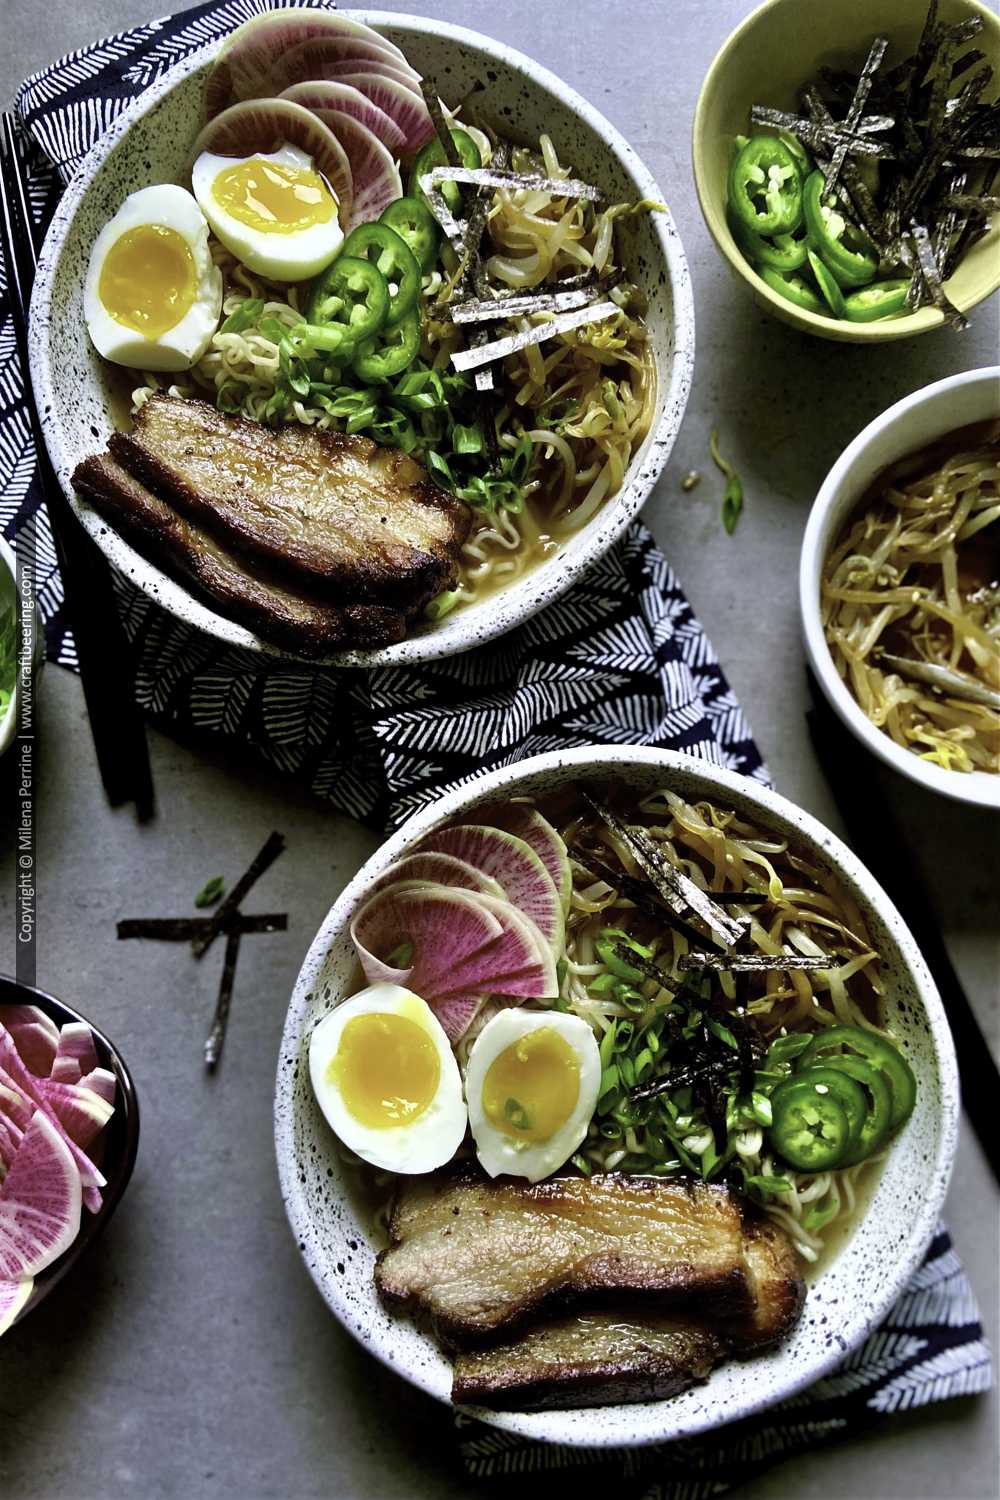 Pork ramen with thick slices of barbecued pork belly and traditional Japanese ramen ingredients.